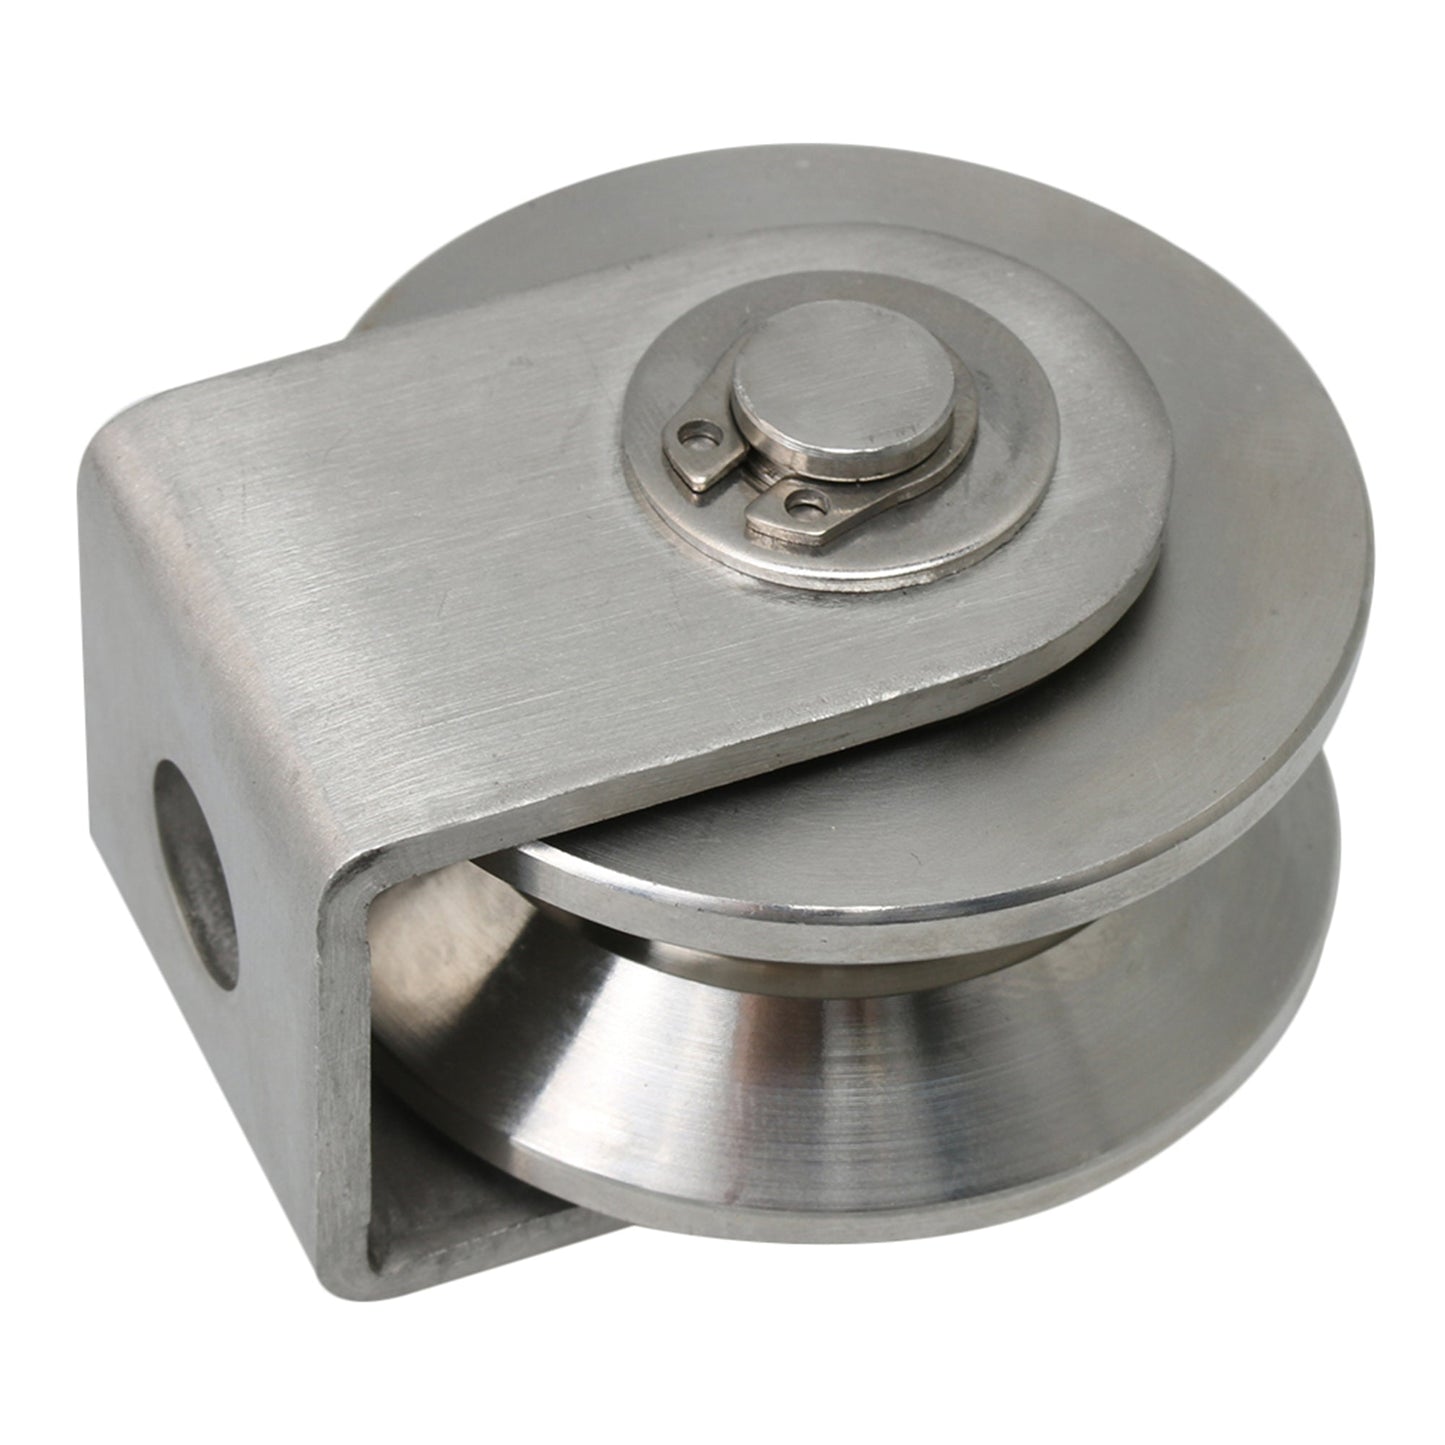 BQLZR 5.3x4.8x3.8cm Silver 201 Stainless Steel V Type Large Fixed Pulley Industrial Heavy Duty Pulley for Lifting Guide Wheel